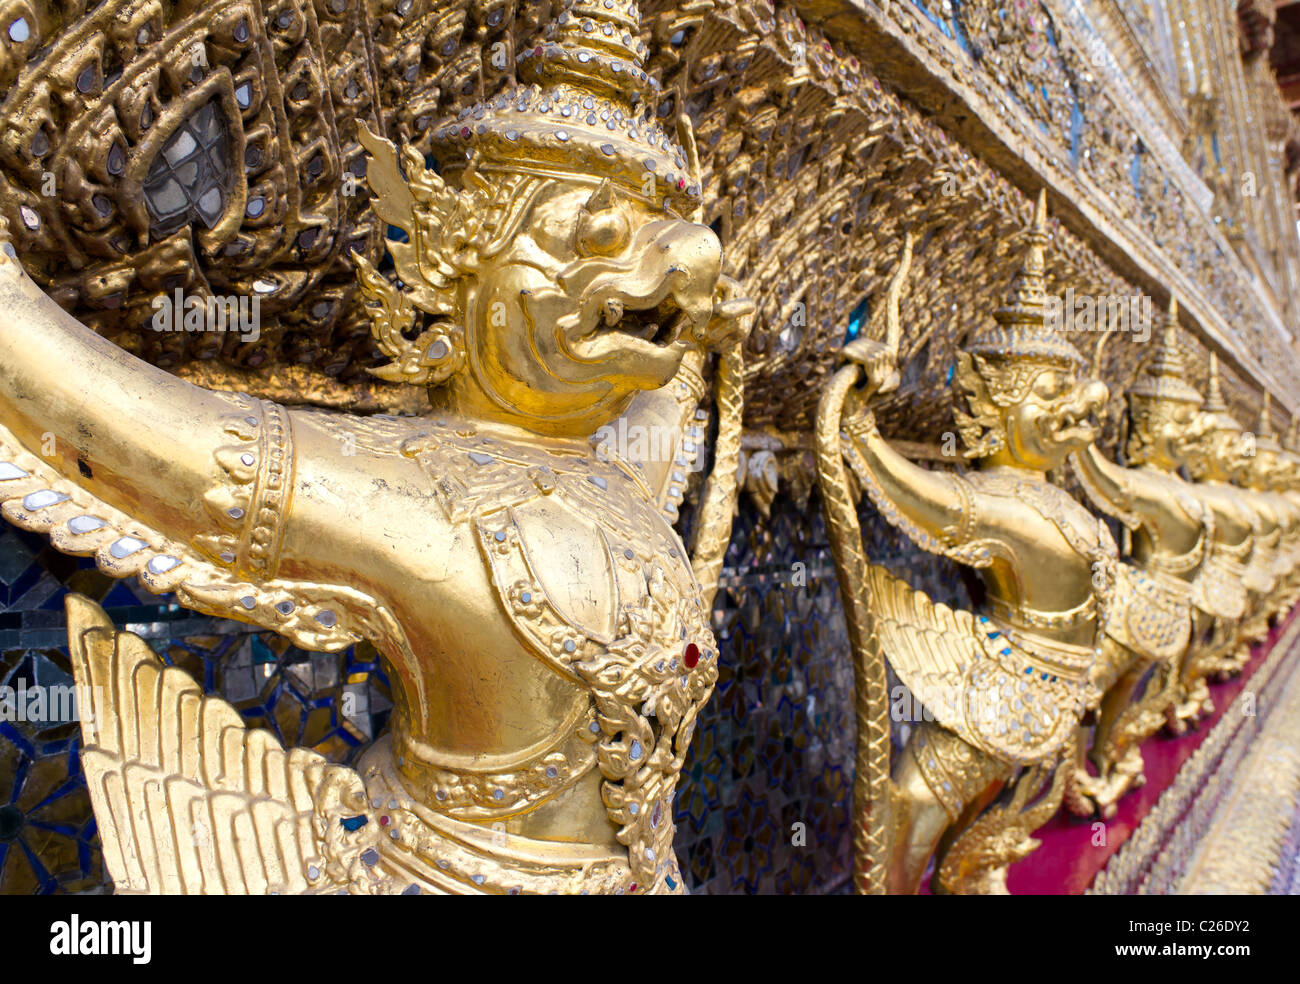 Row of Garuda Statues on the Exterior of the Temple of the Emerald Buddha or Wat Phra Kaew, Grand Palace, Bangkok, Thailand Stock Photo